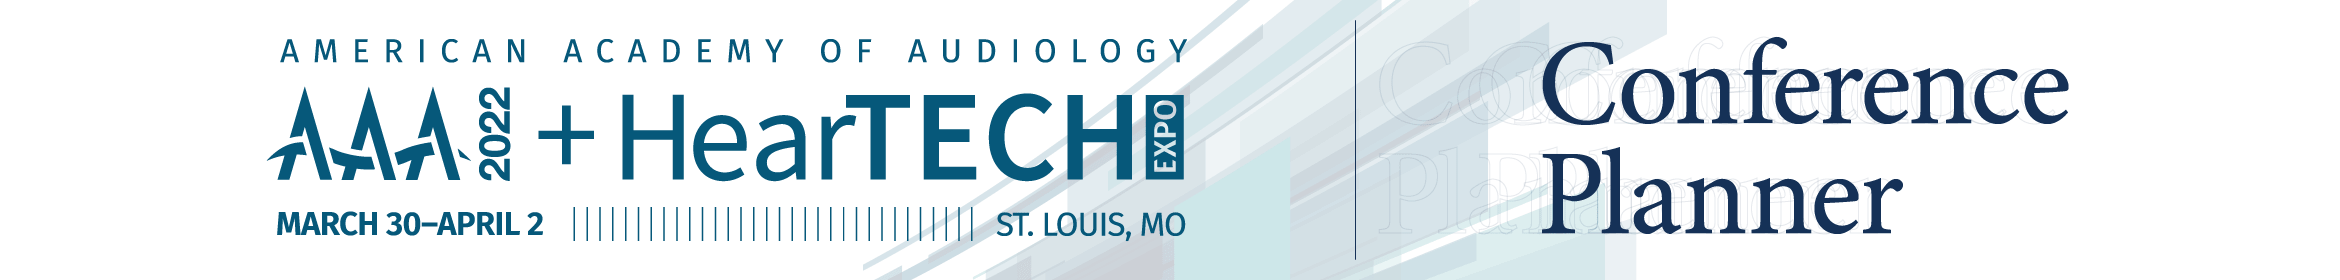 2022 Annual Audiology Meeting Main banner